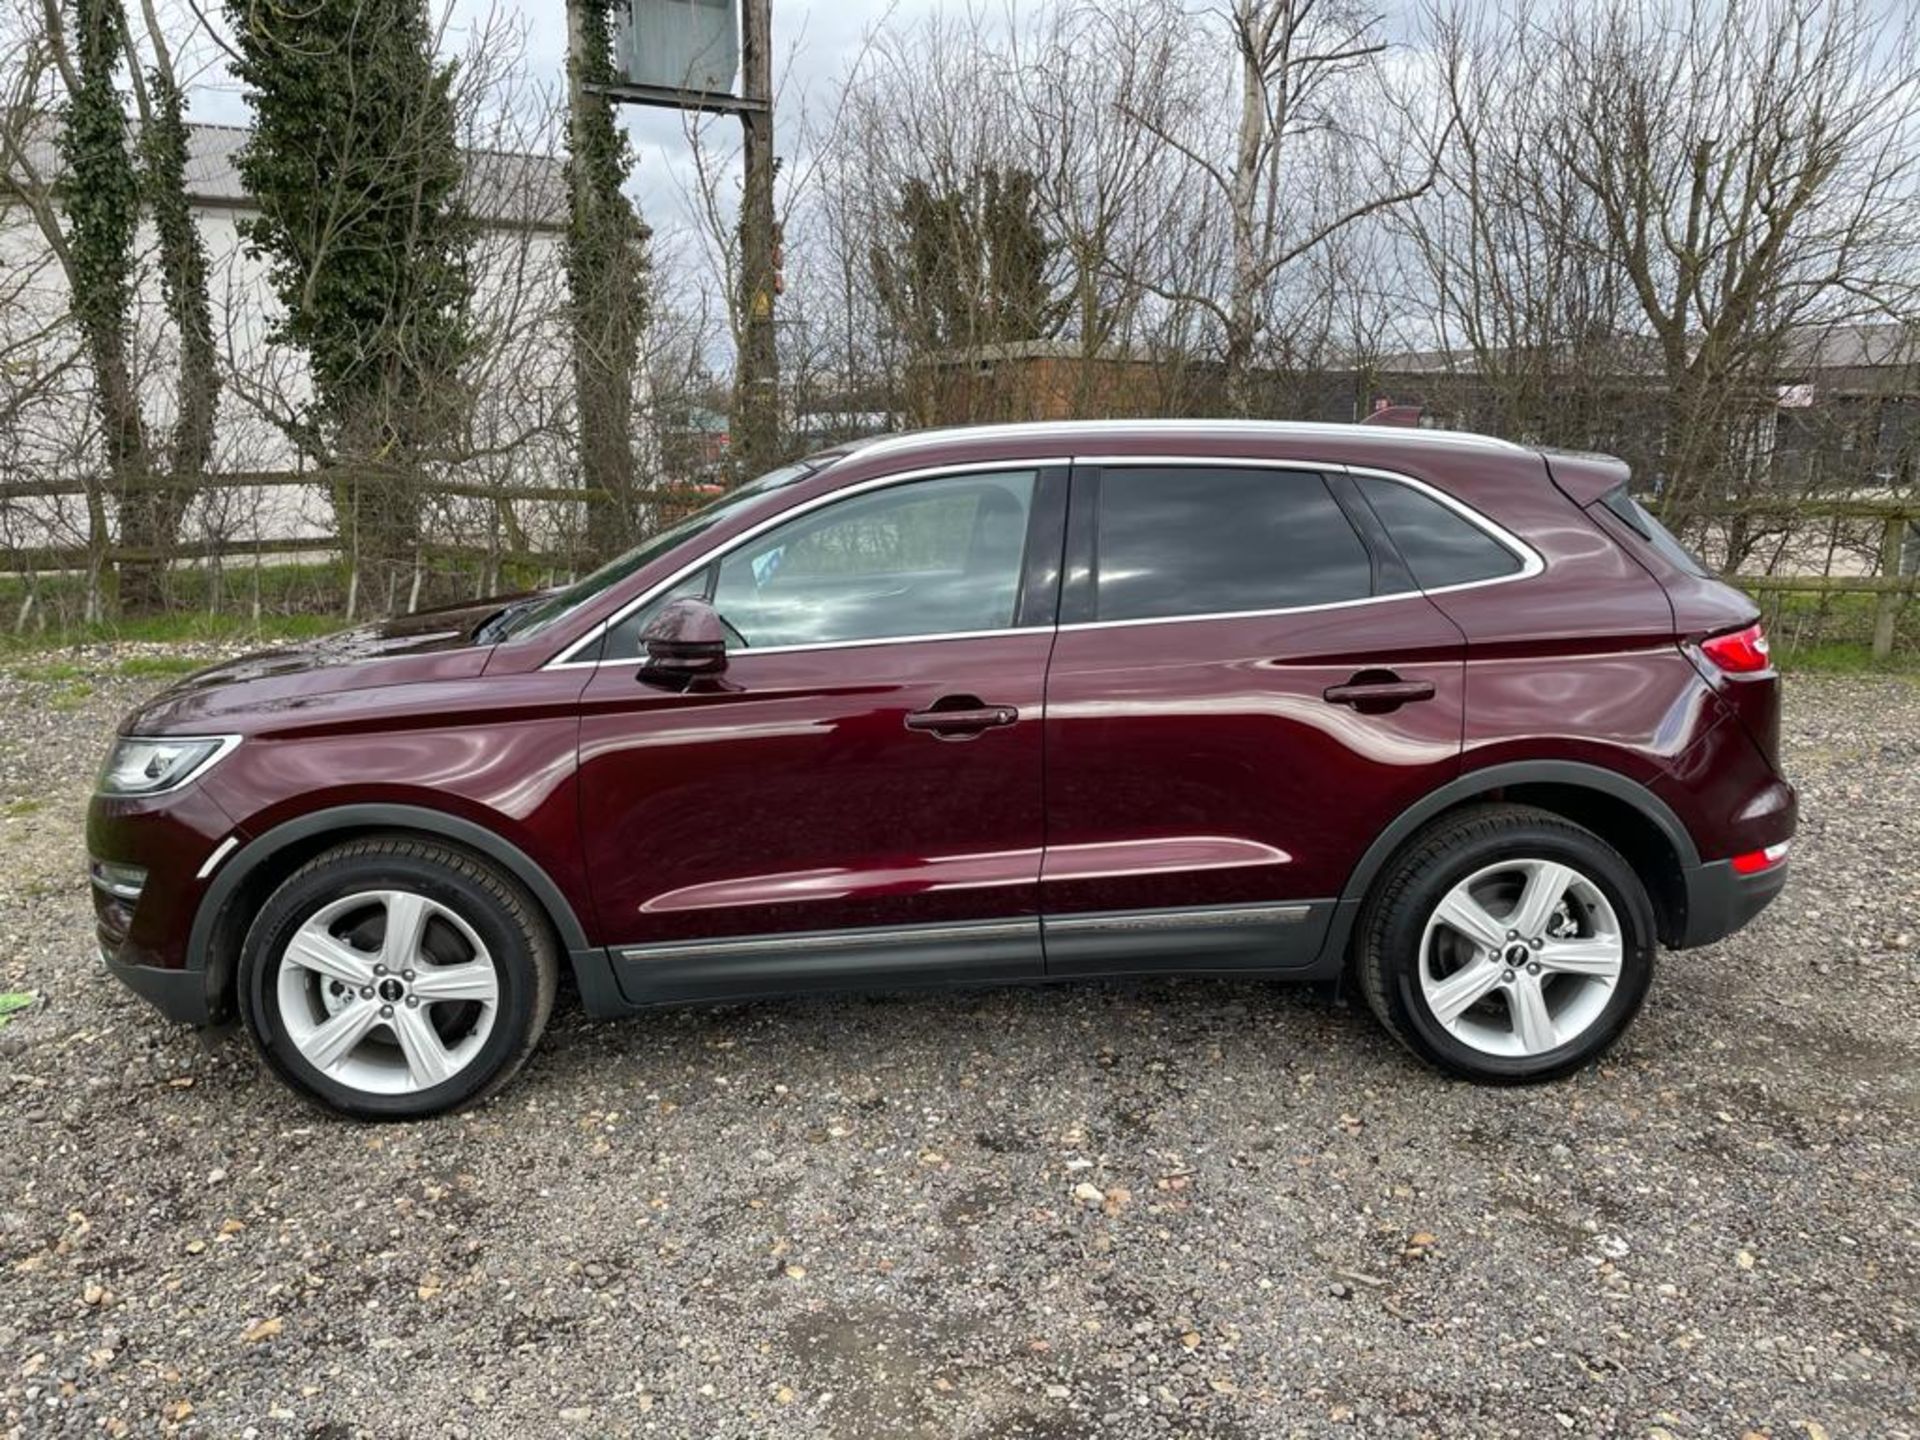 69 PLATE, PRE-REGISTERED 2017MY, LINCOLN MKC PREMIER 2.0L TURBO PETROL ECOBOOST (200bhp) AUTOMATIC - Image 4 of 14